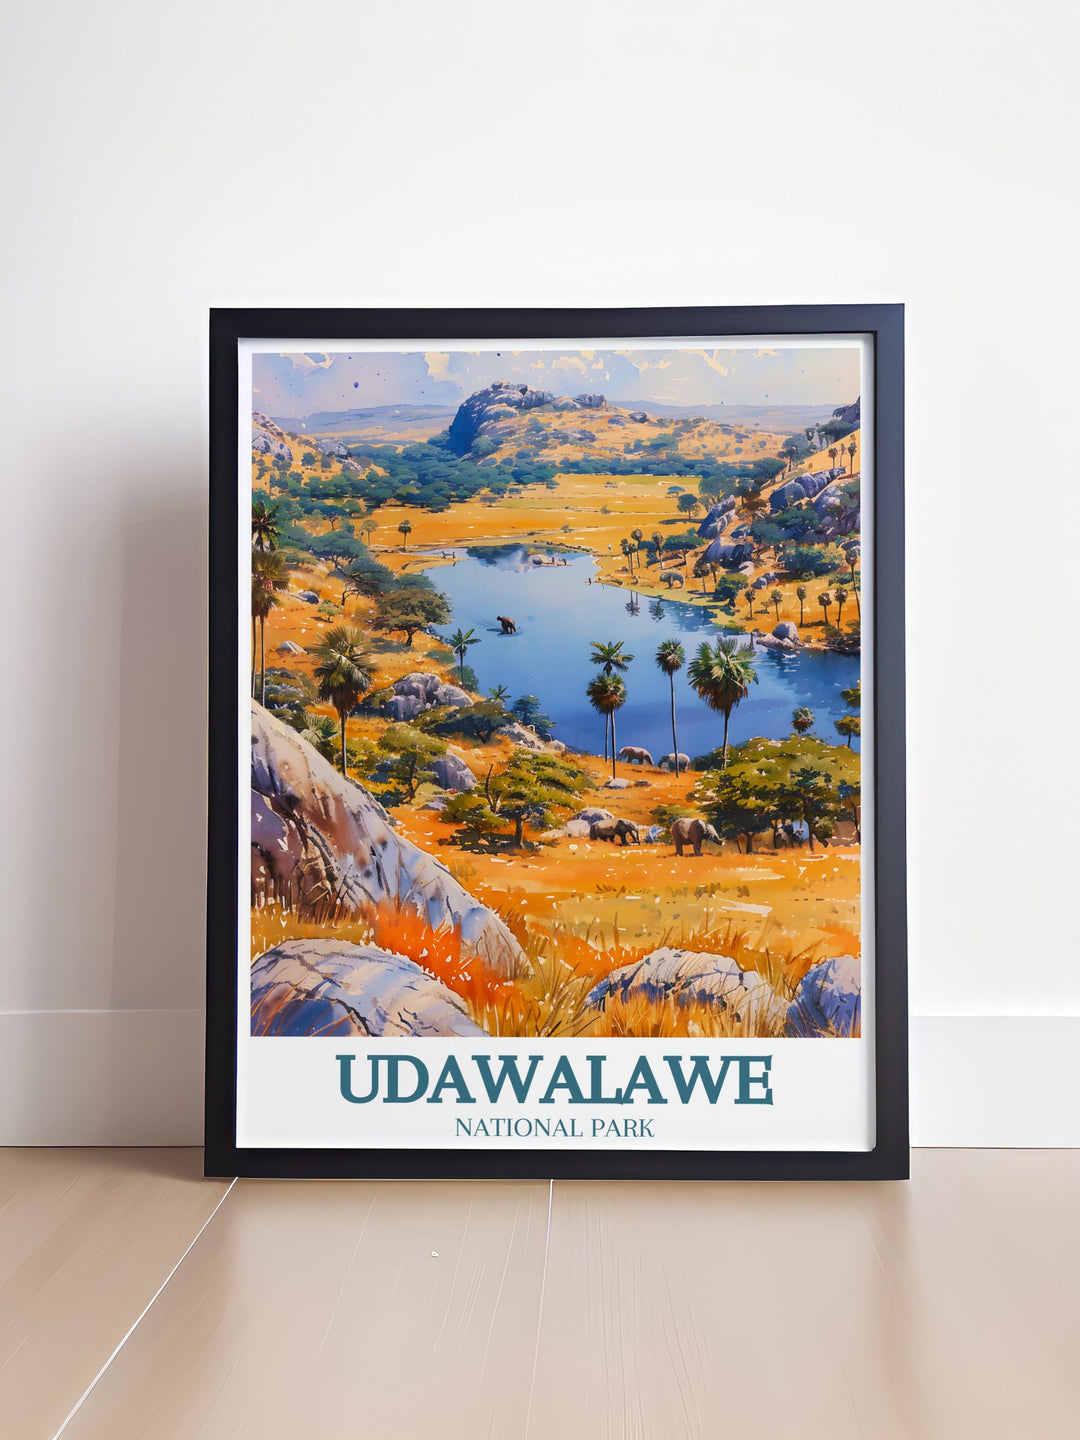 High quality Udawalawe Reservoir Walawe River home decor print bringing the essence of Sri Lankas natural wonders into your living space perfect for nature enthusiasts and adventure seekers looking to add a touch of the wild to their home.